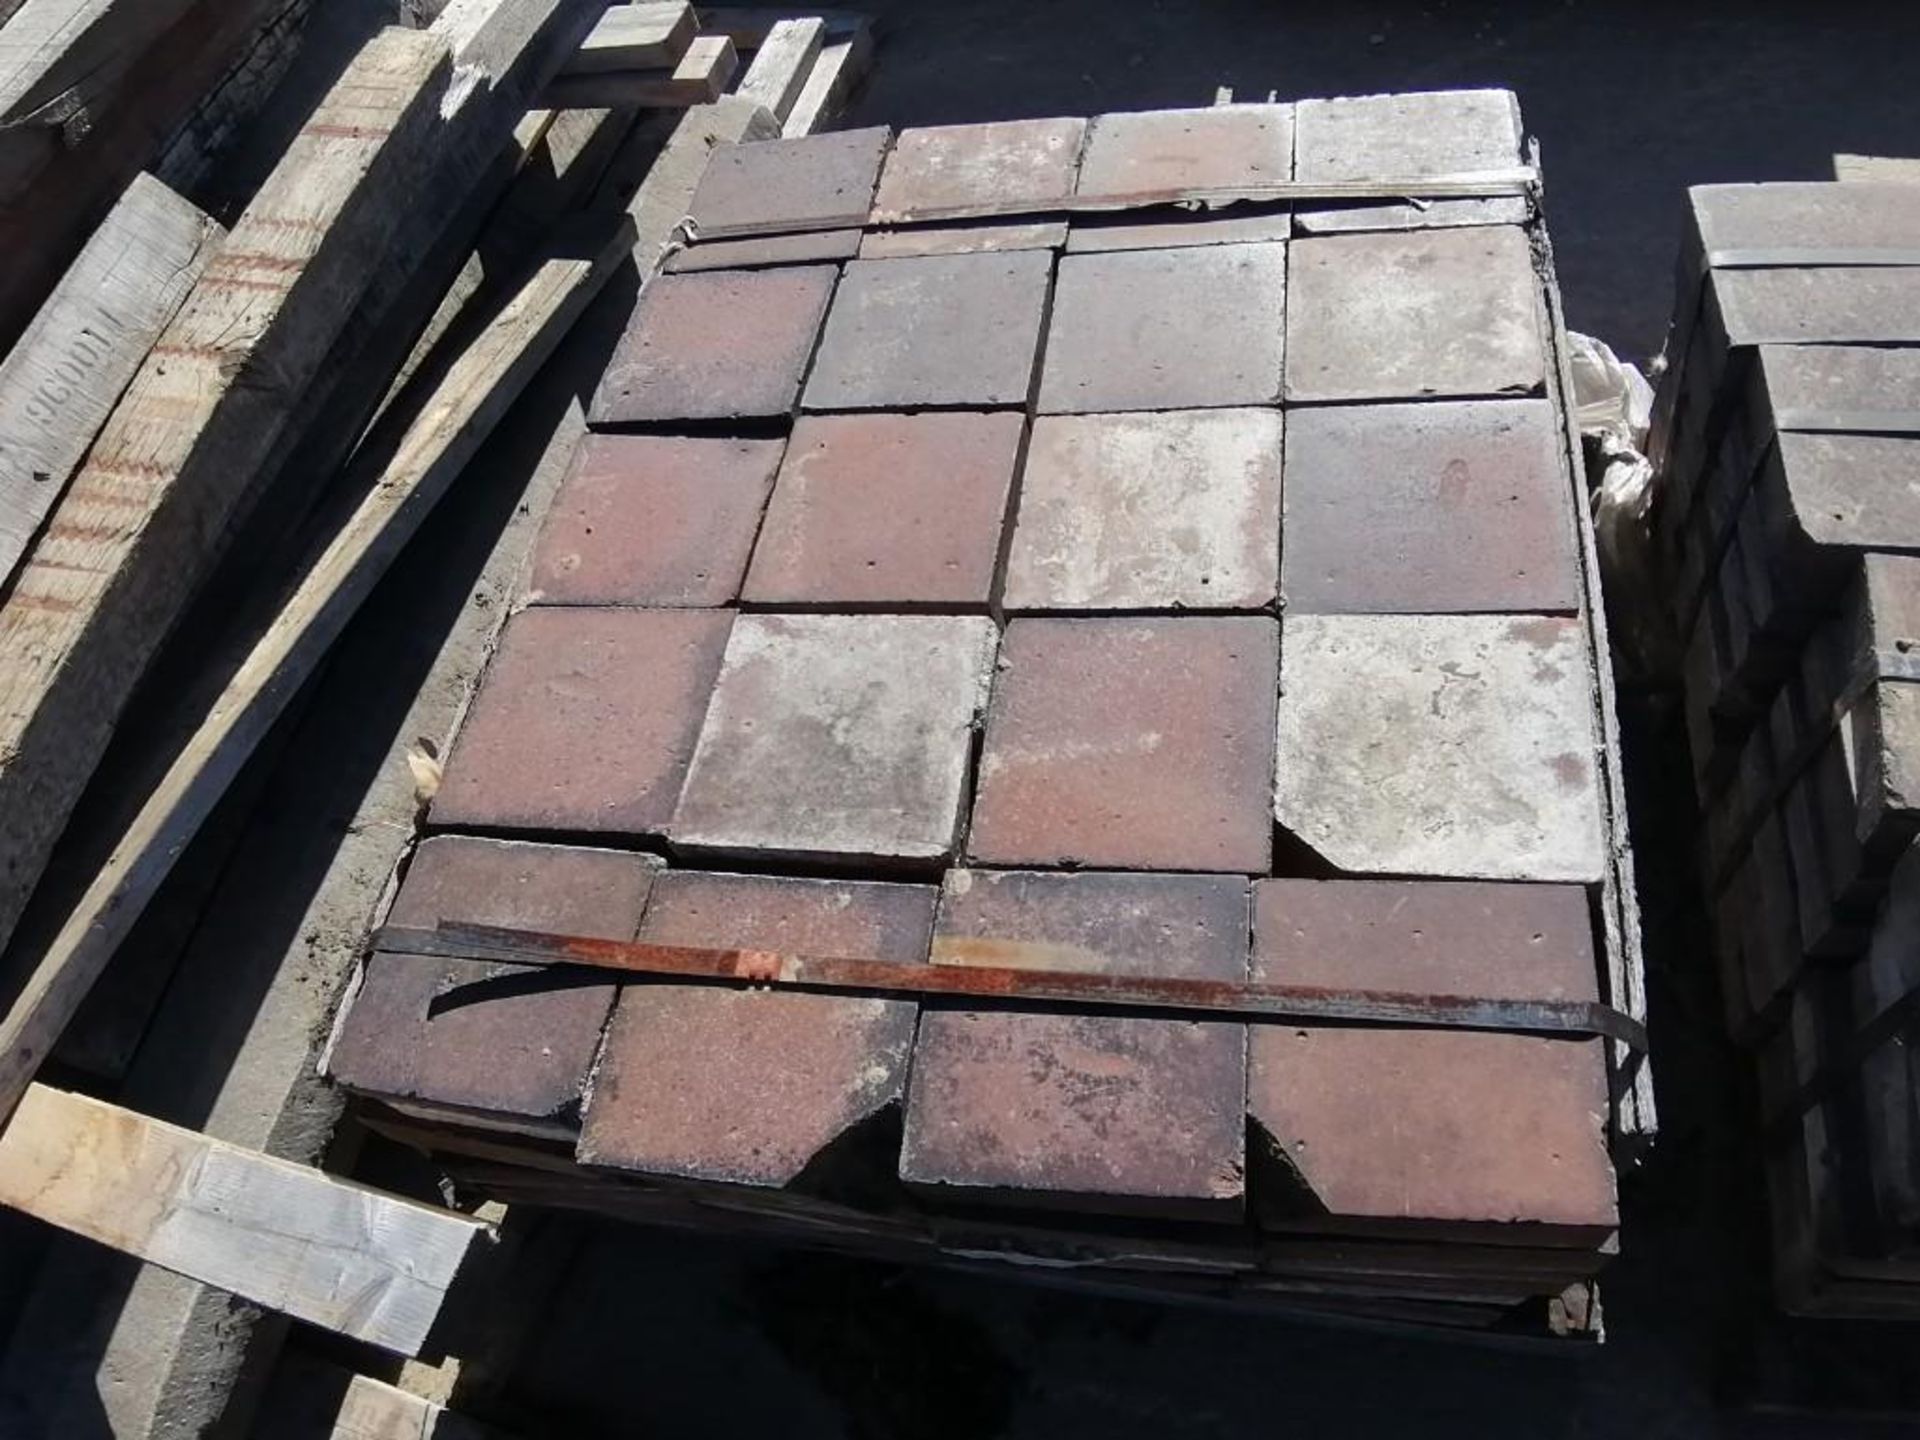 Lot of (2) Pallets with 280 total 8" x 8" Paving Bricks. Located in Hazelwood, MO. - Image 5 of 5